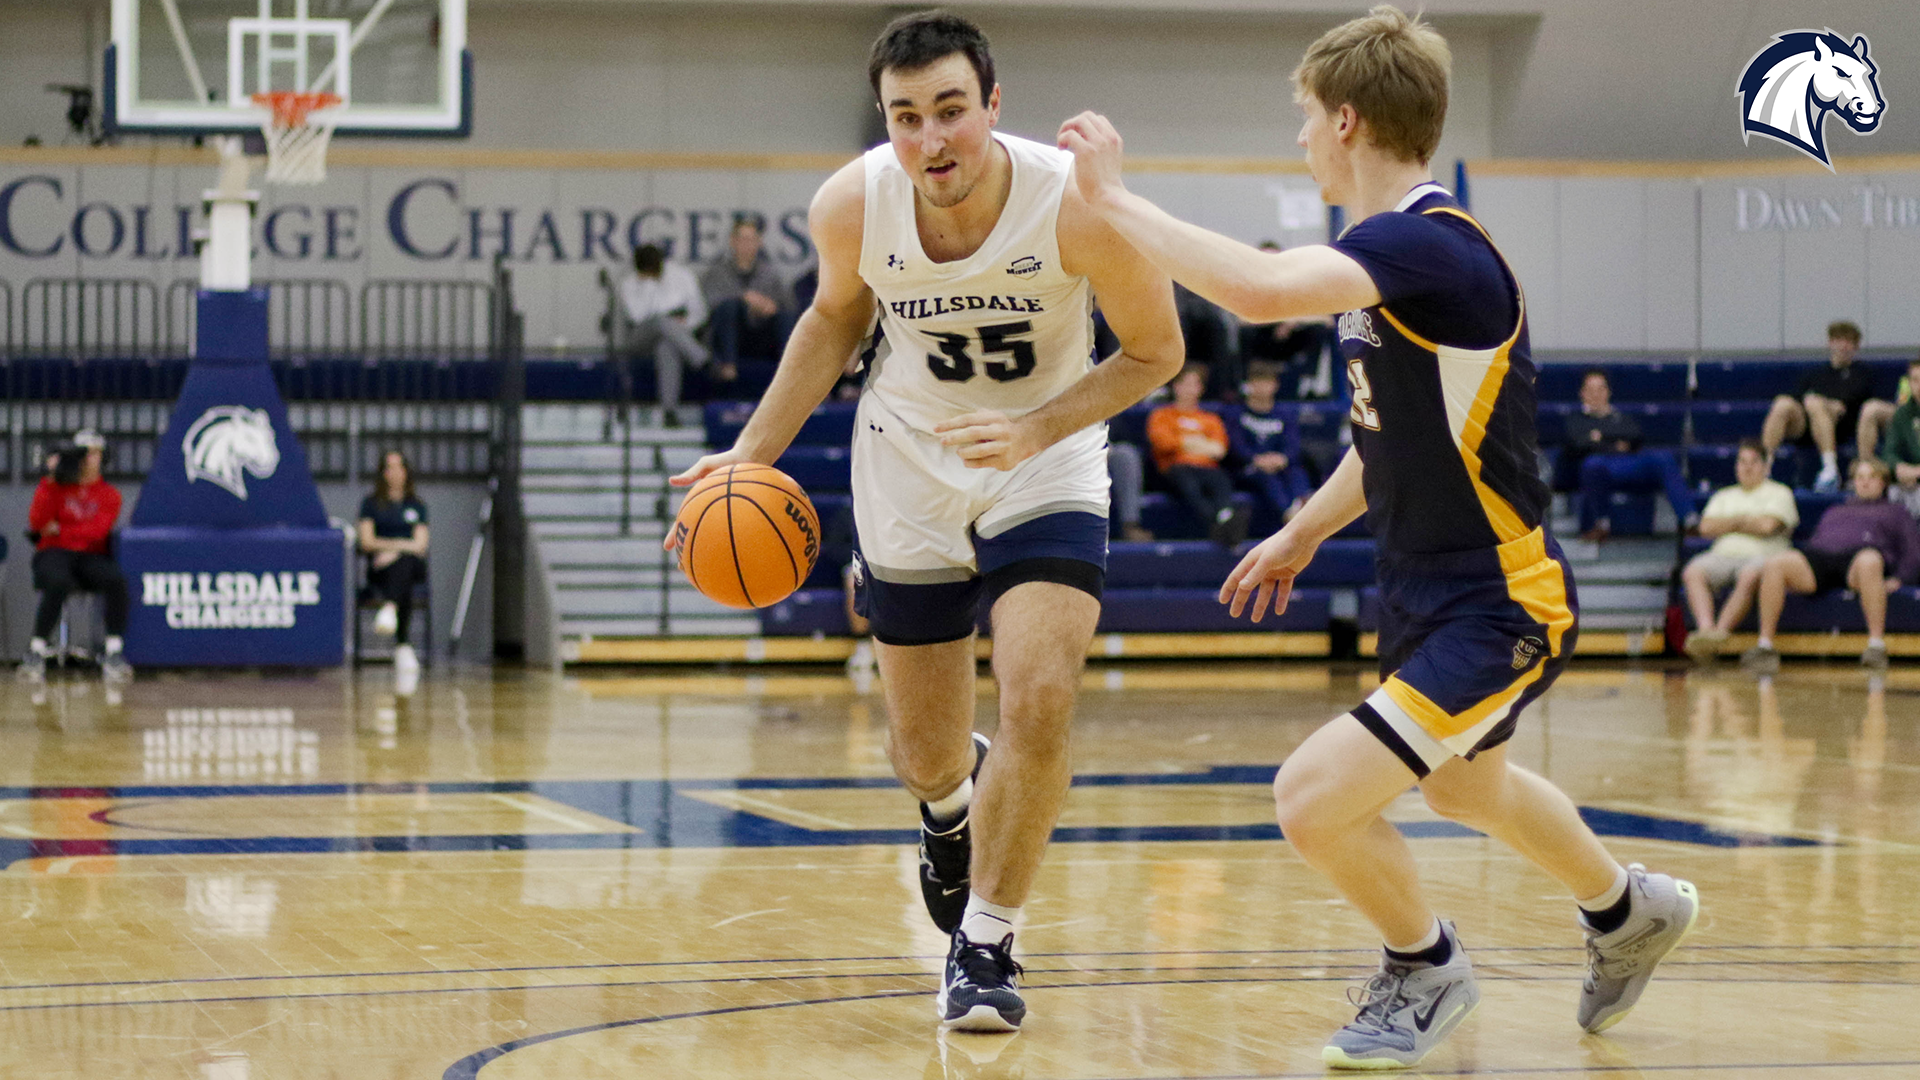 Big second half leads Chargers past Cedarville, 87-57, in G-MAC Quarterfinal